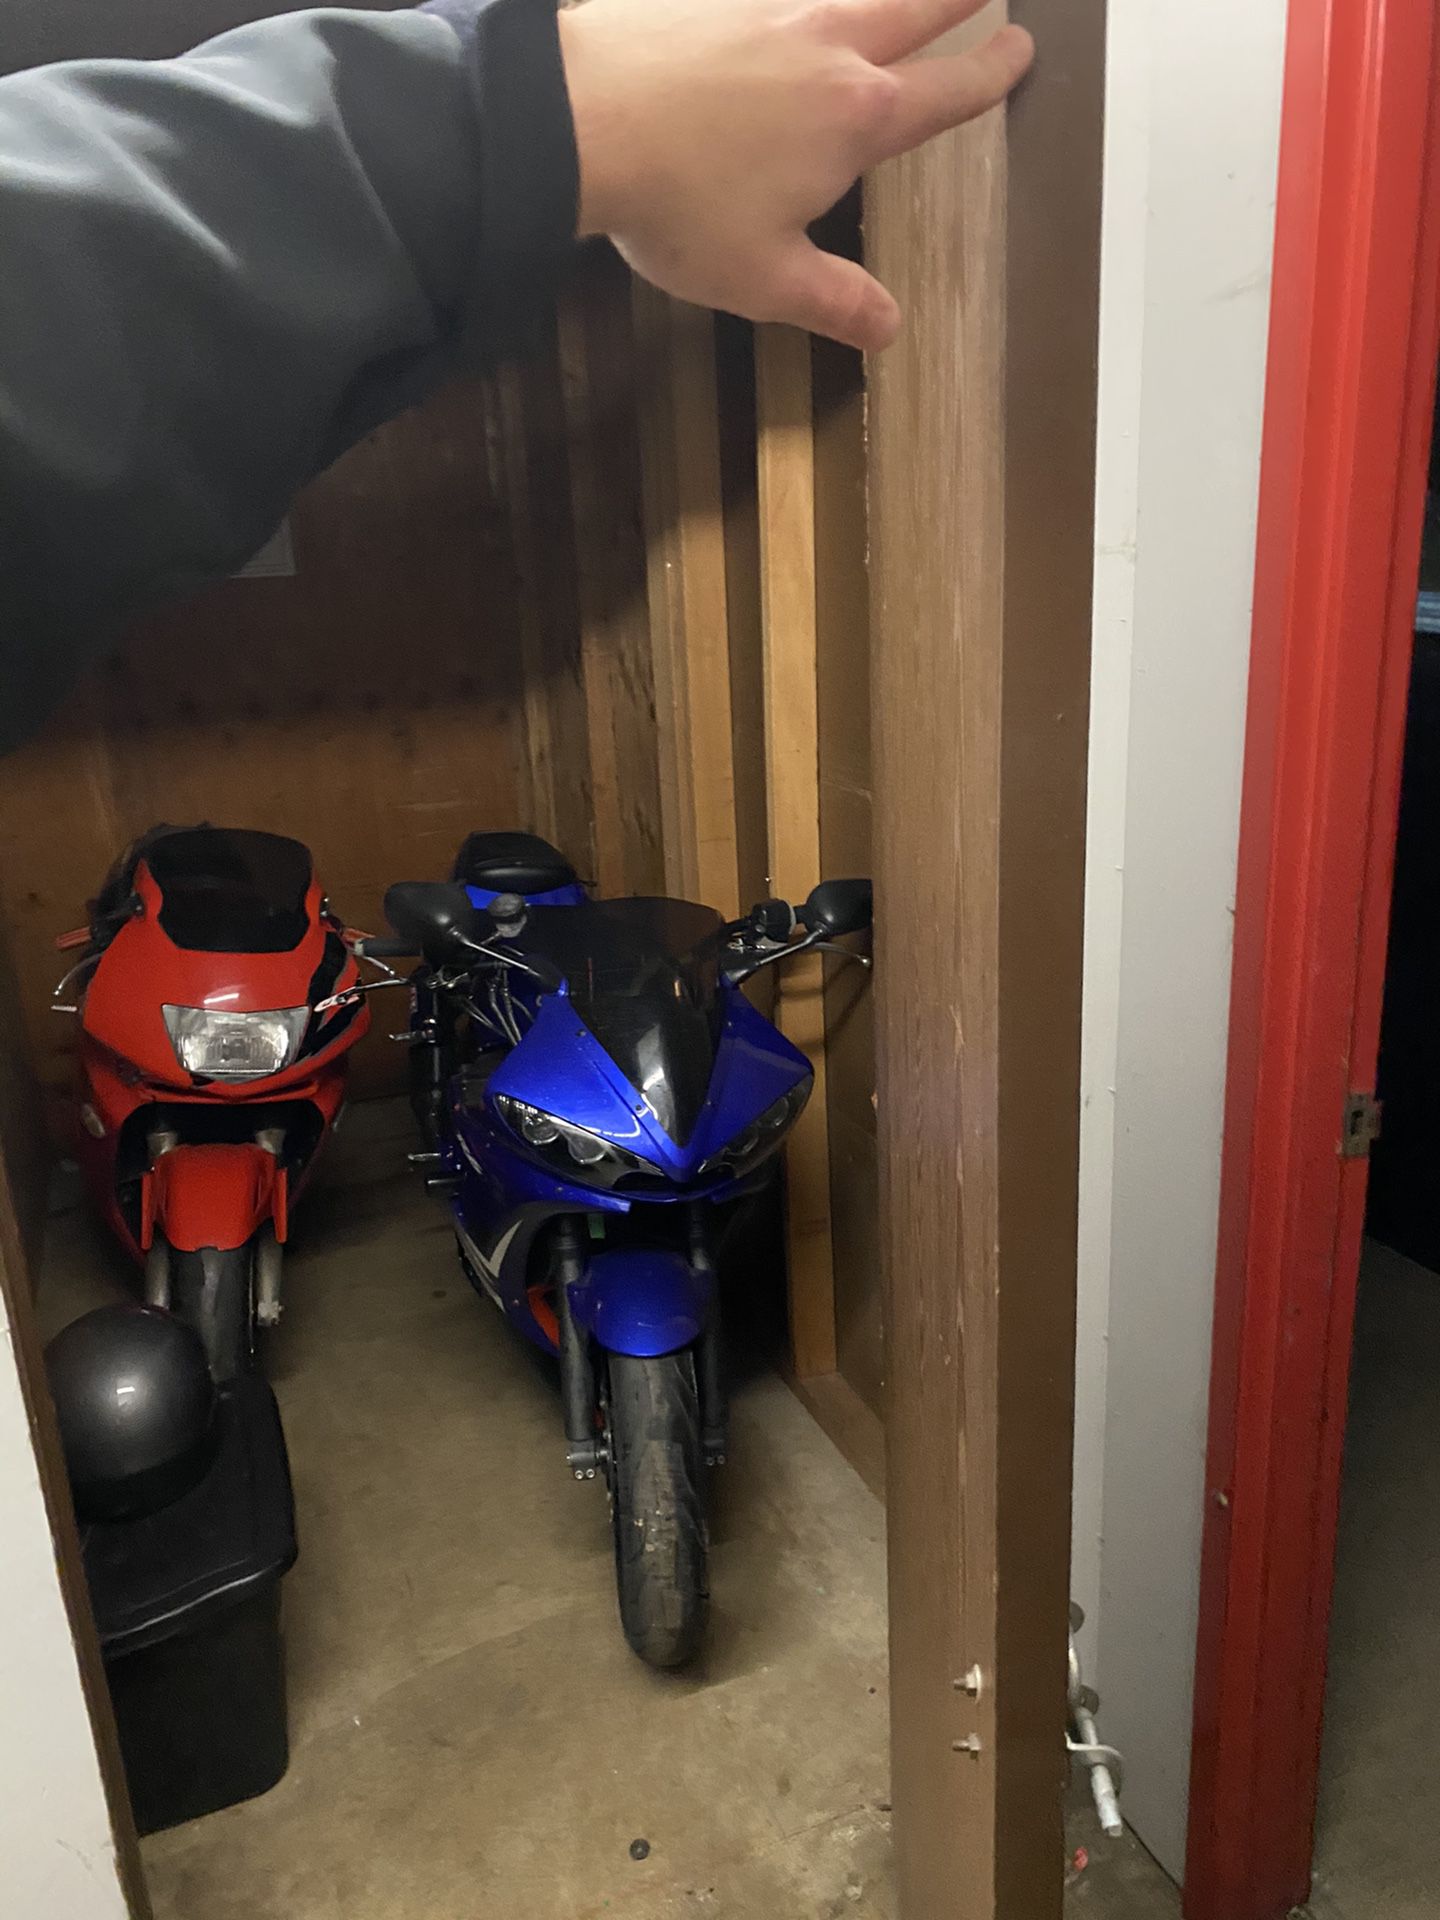 Photo 2009 yamaha R6s and 1998 cbr 600 the yamaha runs and rides like new it needs nothing and has about 20k miles. the cbr has a blown fuse im almost posi